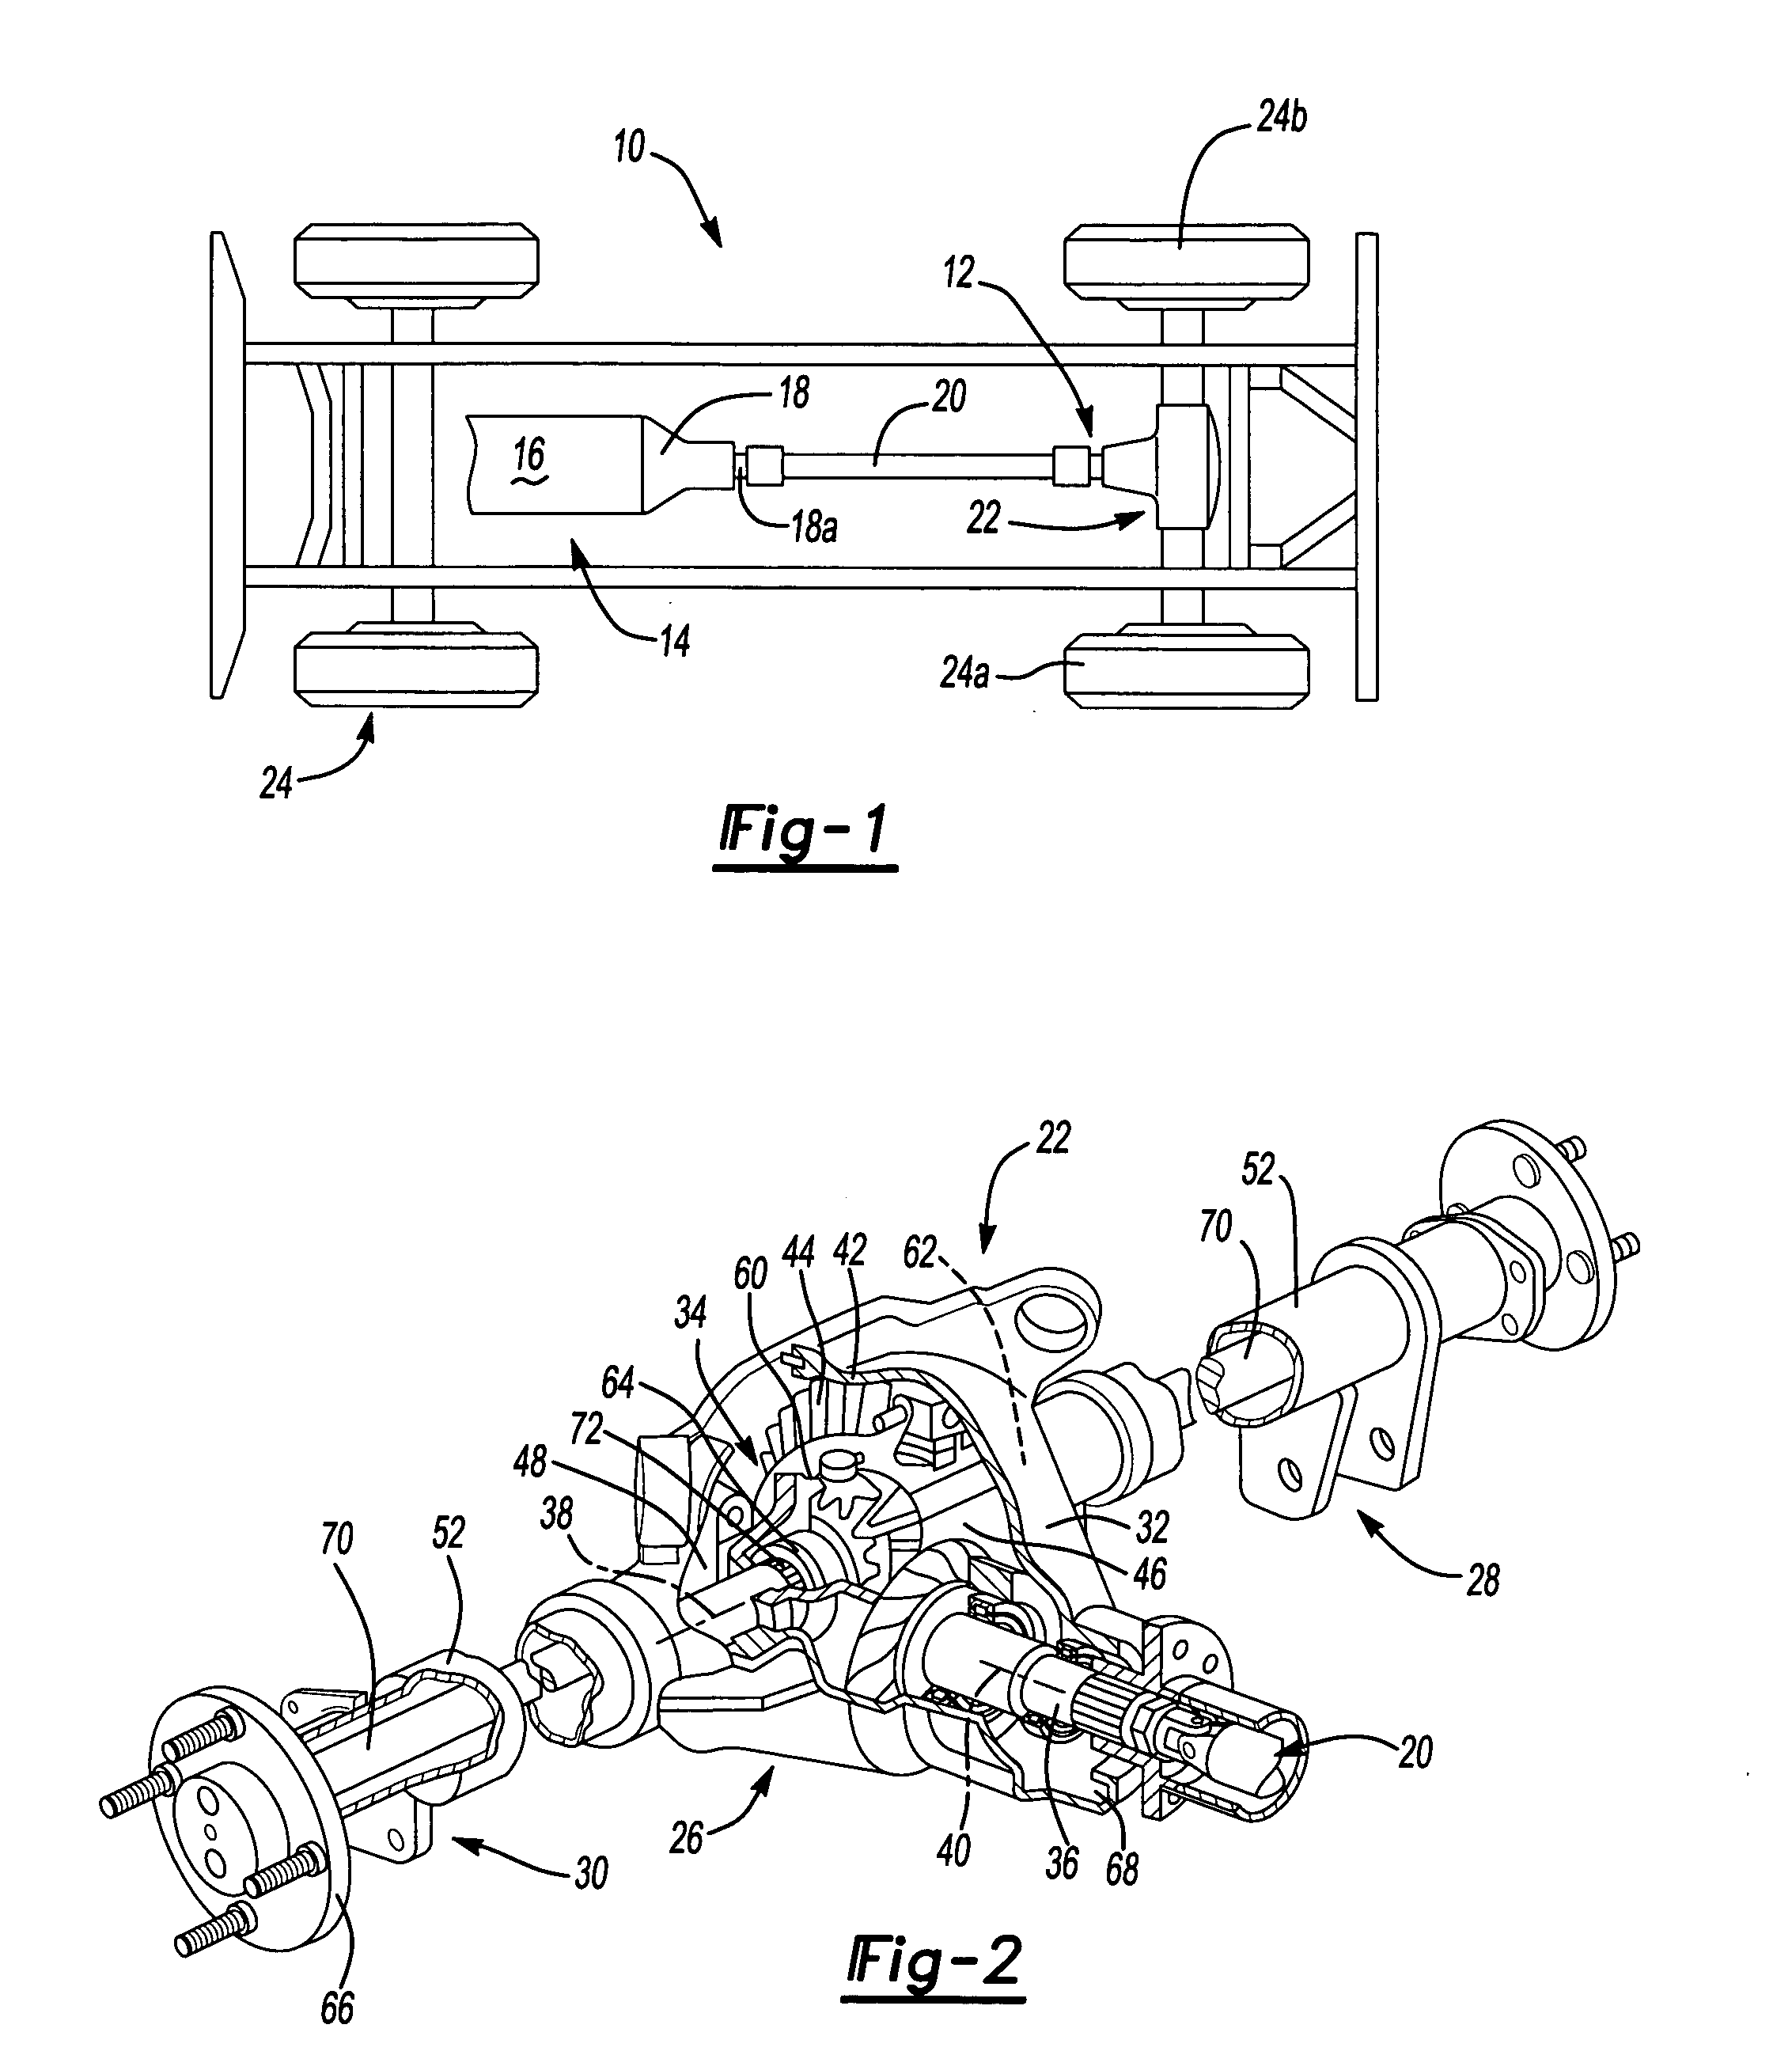 Beam axle with integral sensor mount and target